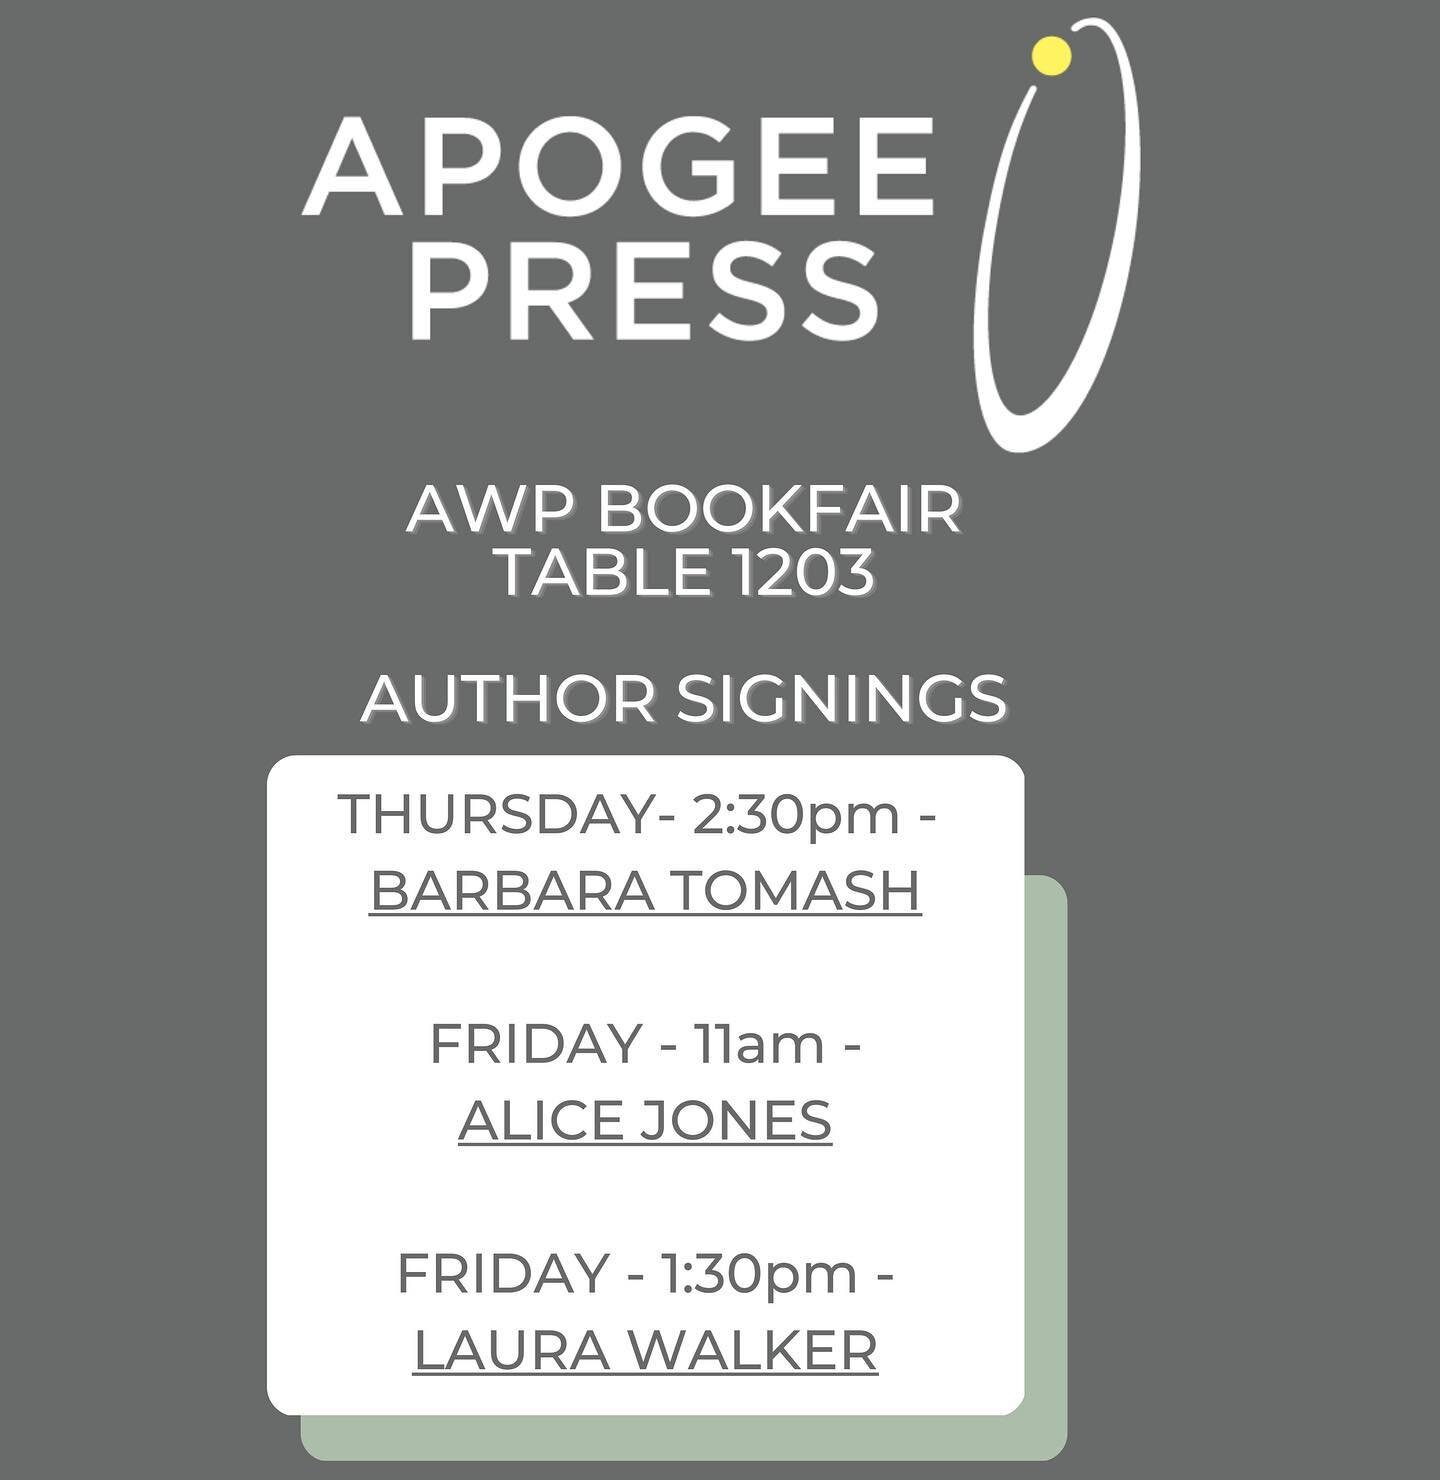 Can&rsquo;t wait to see you this week at #awp23 🎉Come by Table 1203 for signings by Barbara Tomash, Alice Jones, and Laura Walker! Or any other time to say hi and get some discounted books 📚❤️